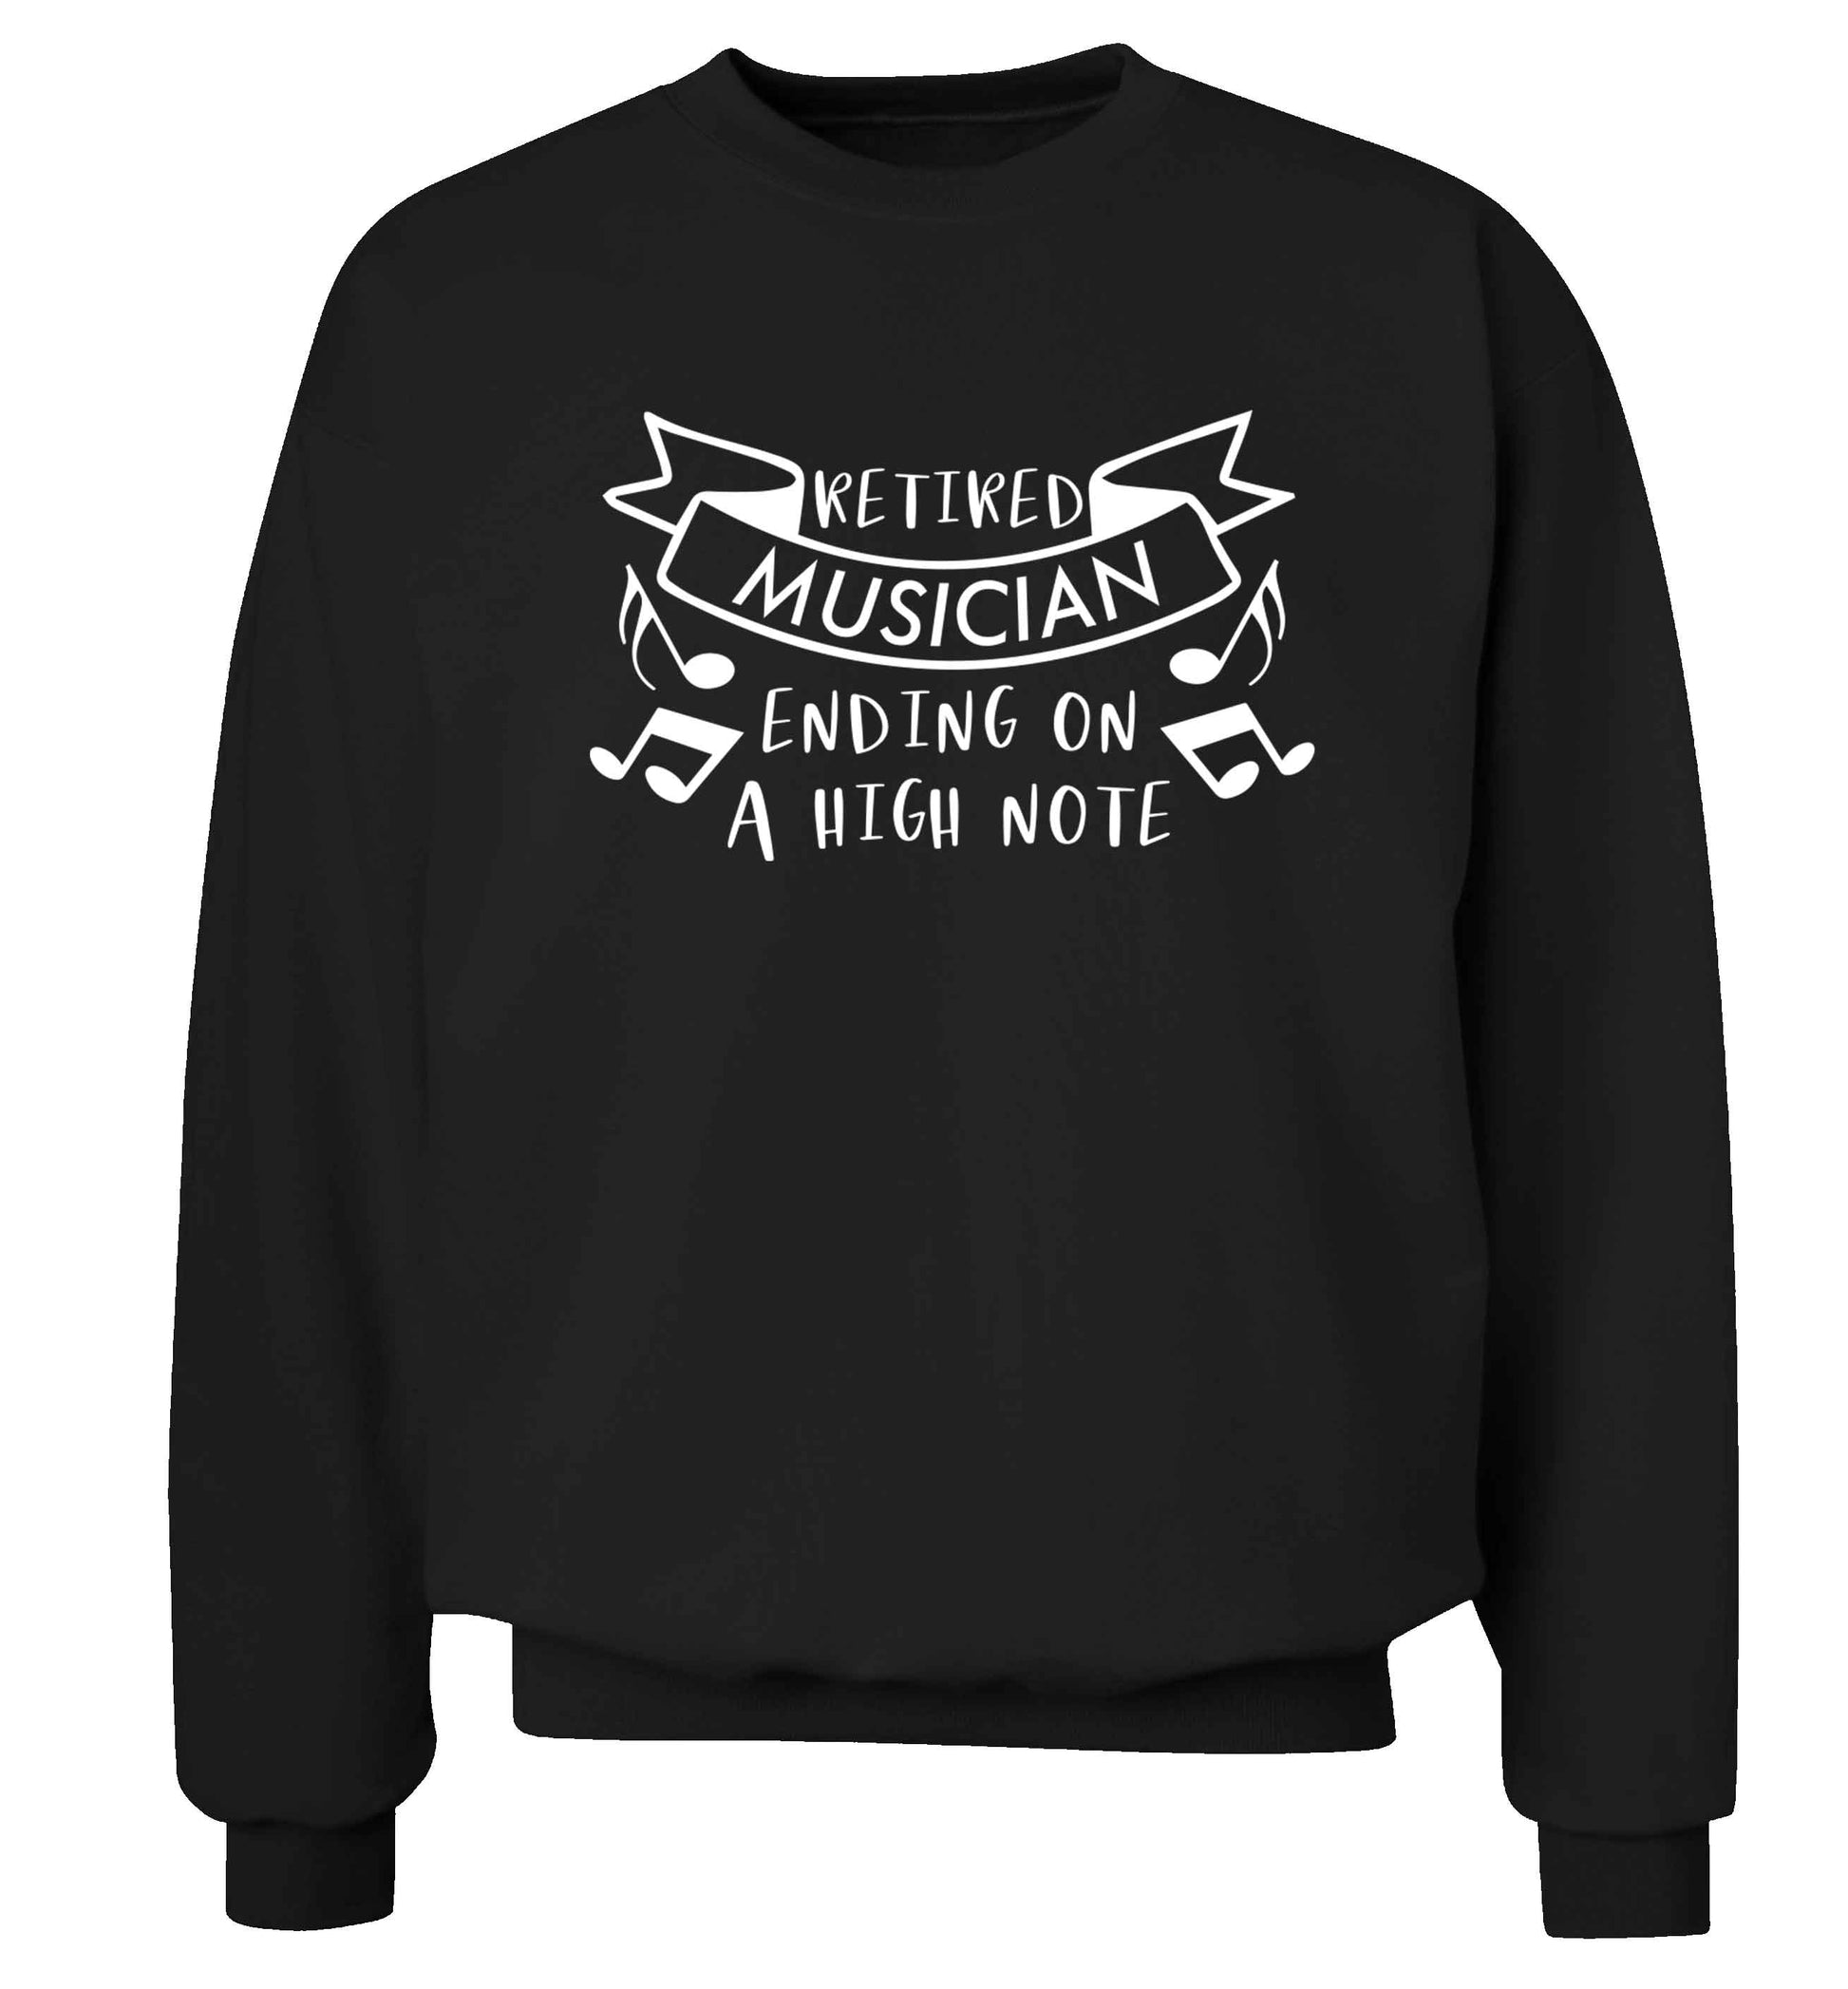 Retired musician ending on a high note Adult's unisex black Sweater 2XL